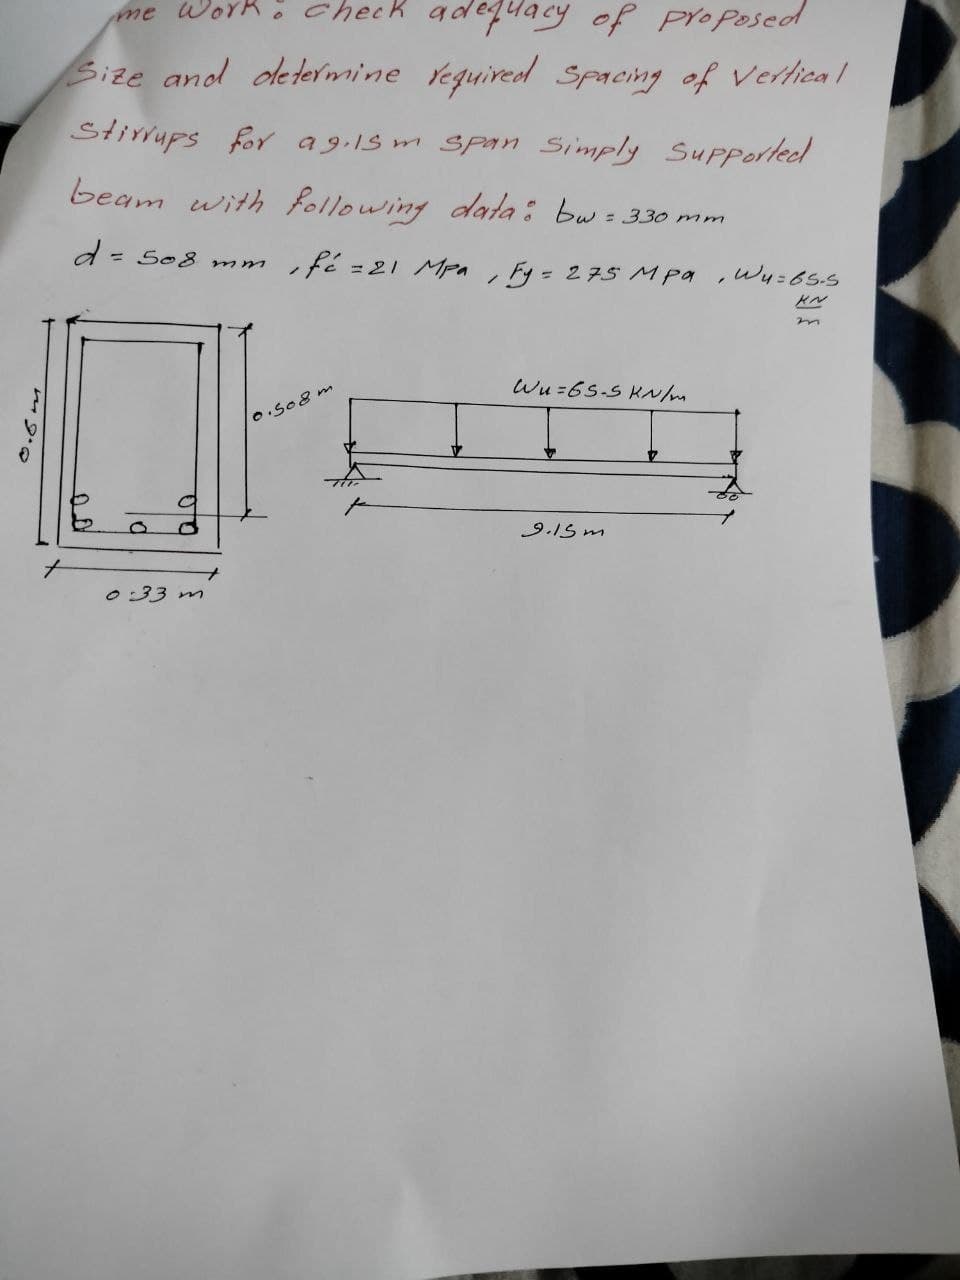 me work: check adequacy of proposed
Size and determine required Spacing of Vertical
Stirrups for ag.15m Span Simply Supported
beam with following data: bw = 330 mm
d = 508 mm.
'
fé = 21 Mpa
/
Fy= 275 MPa
, Wu=65.5
उ
0.5m
00
d
0:33 m
10.508 m
Wu=65-5 KN/m
9.15 m
KN
m